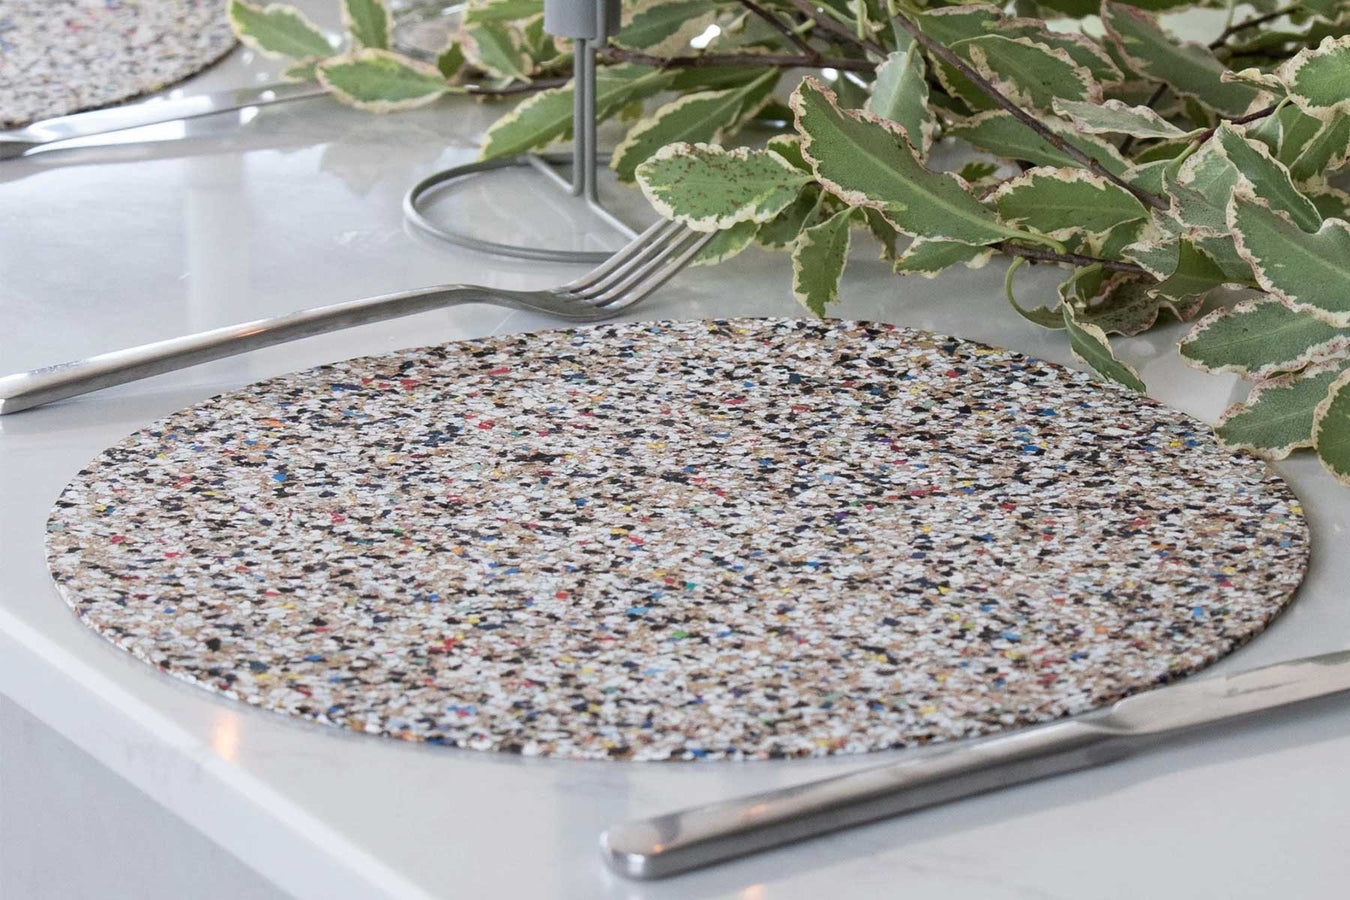 A speckled beachmat which has been recycled from beach plastics is laid on a table with cutlery and greenery.